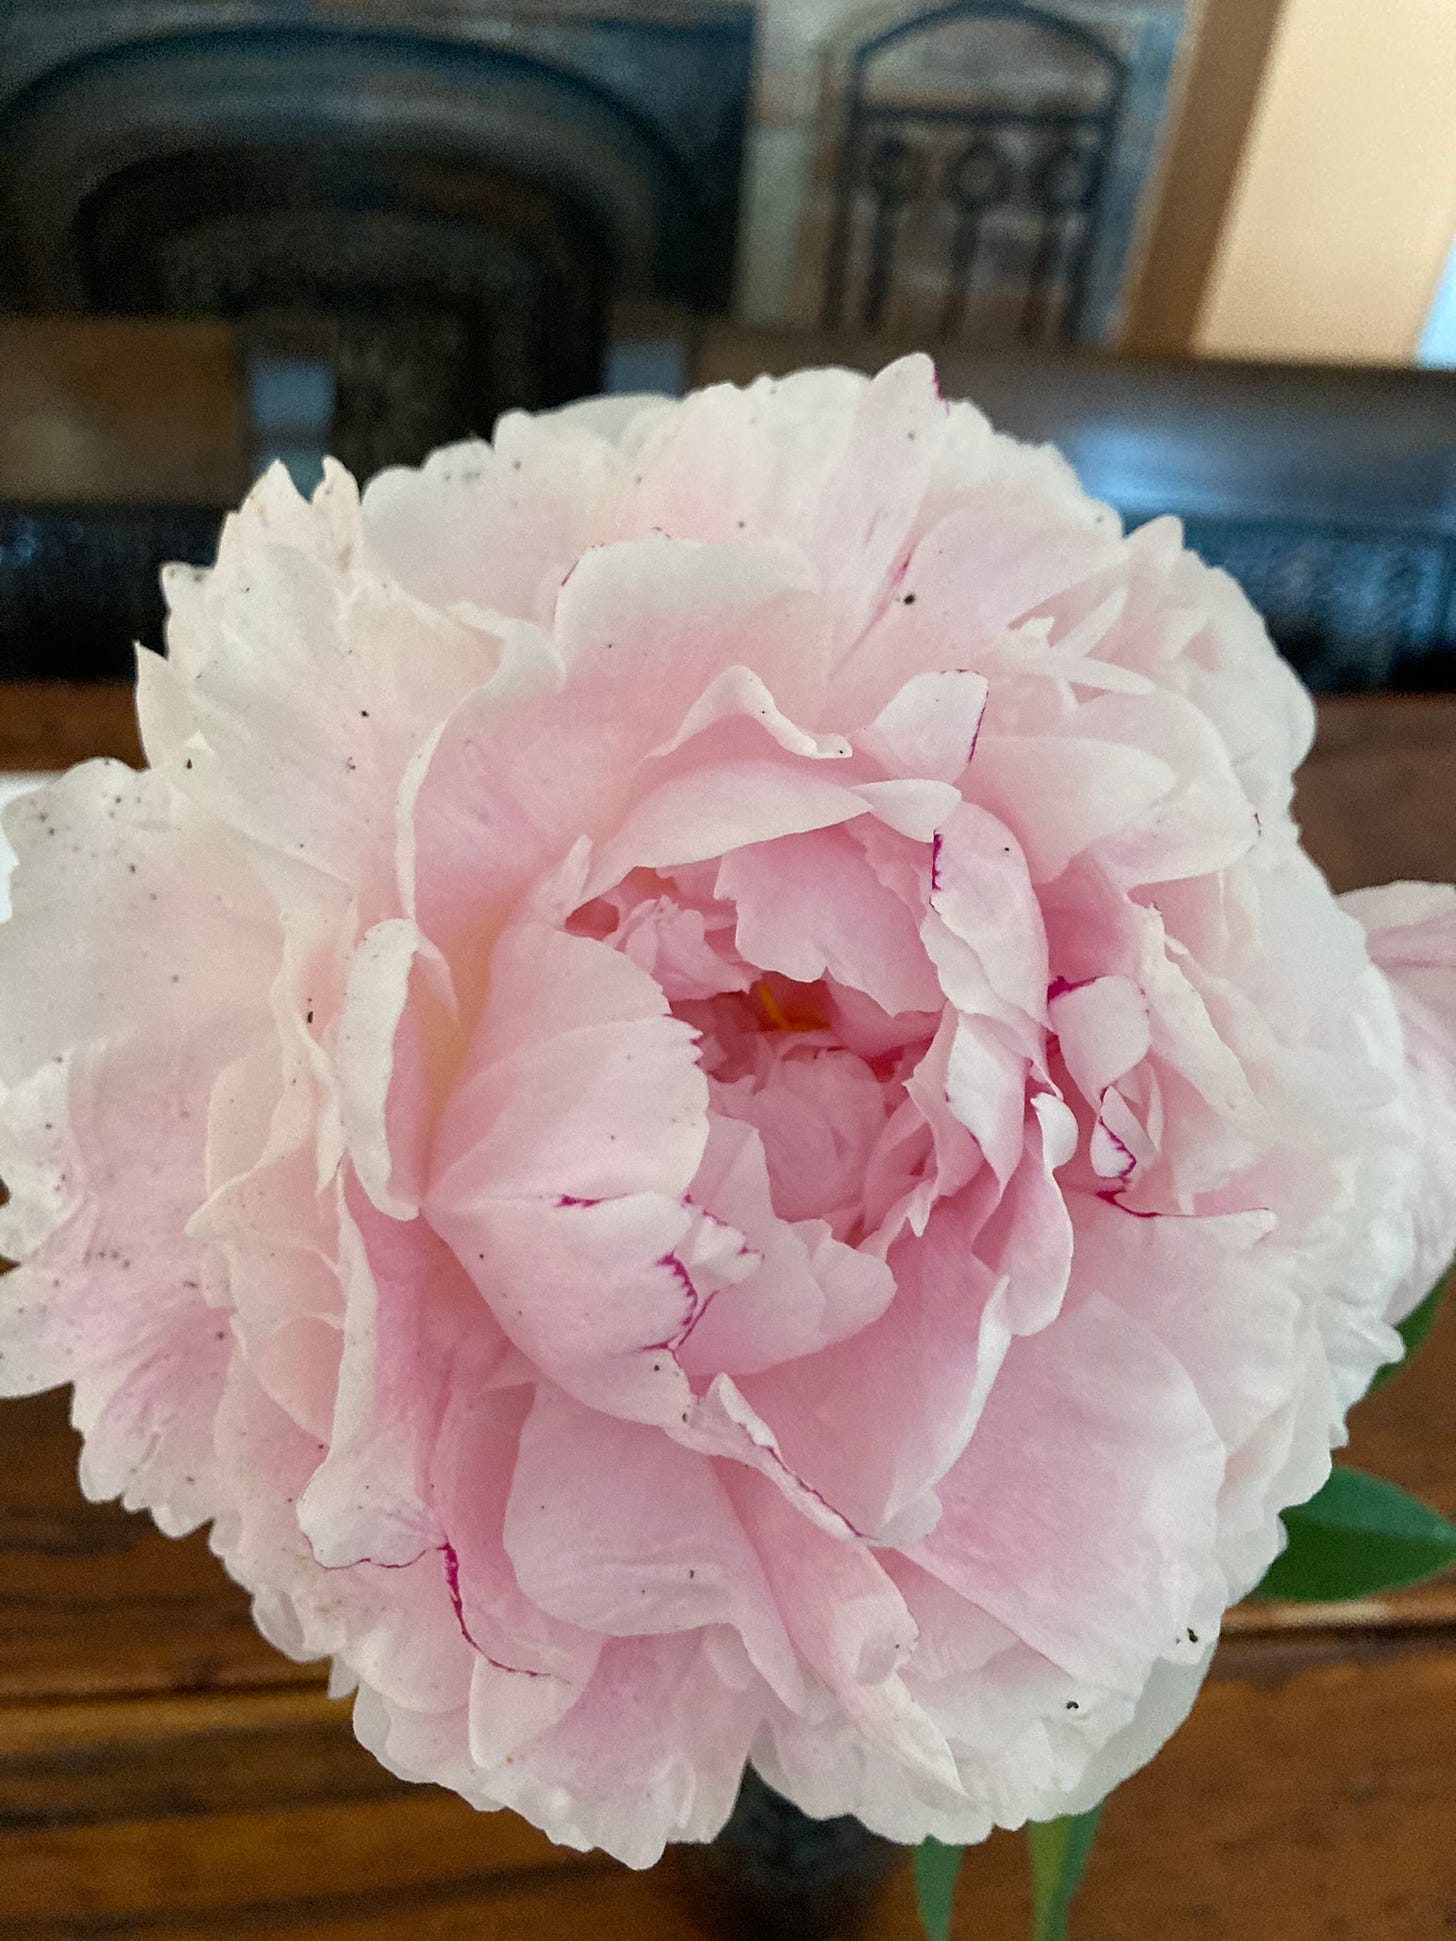 A light, pink peony bloom, speckled with dirt